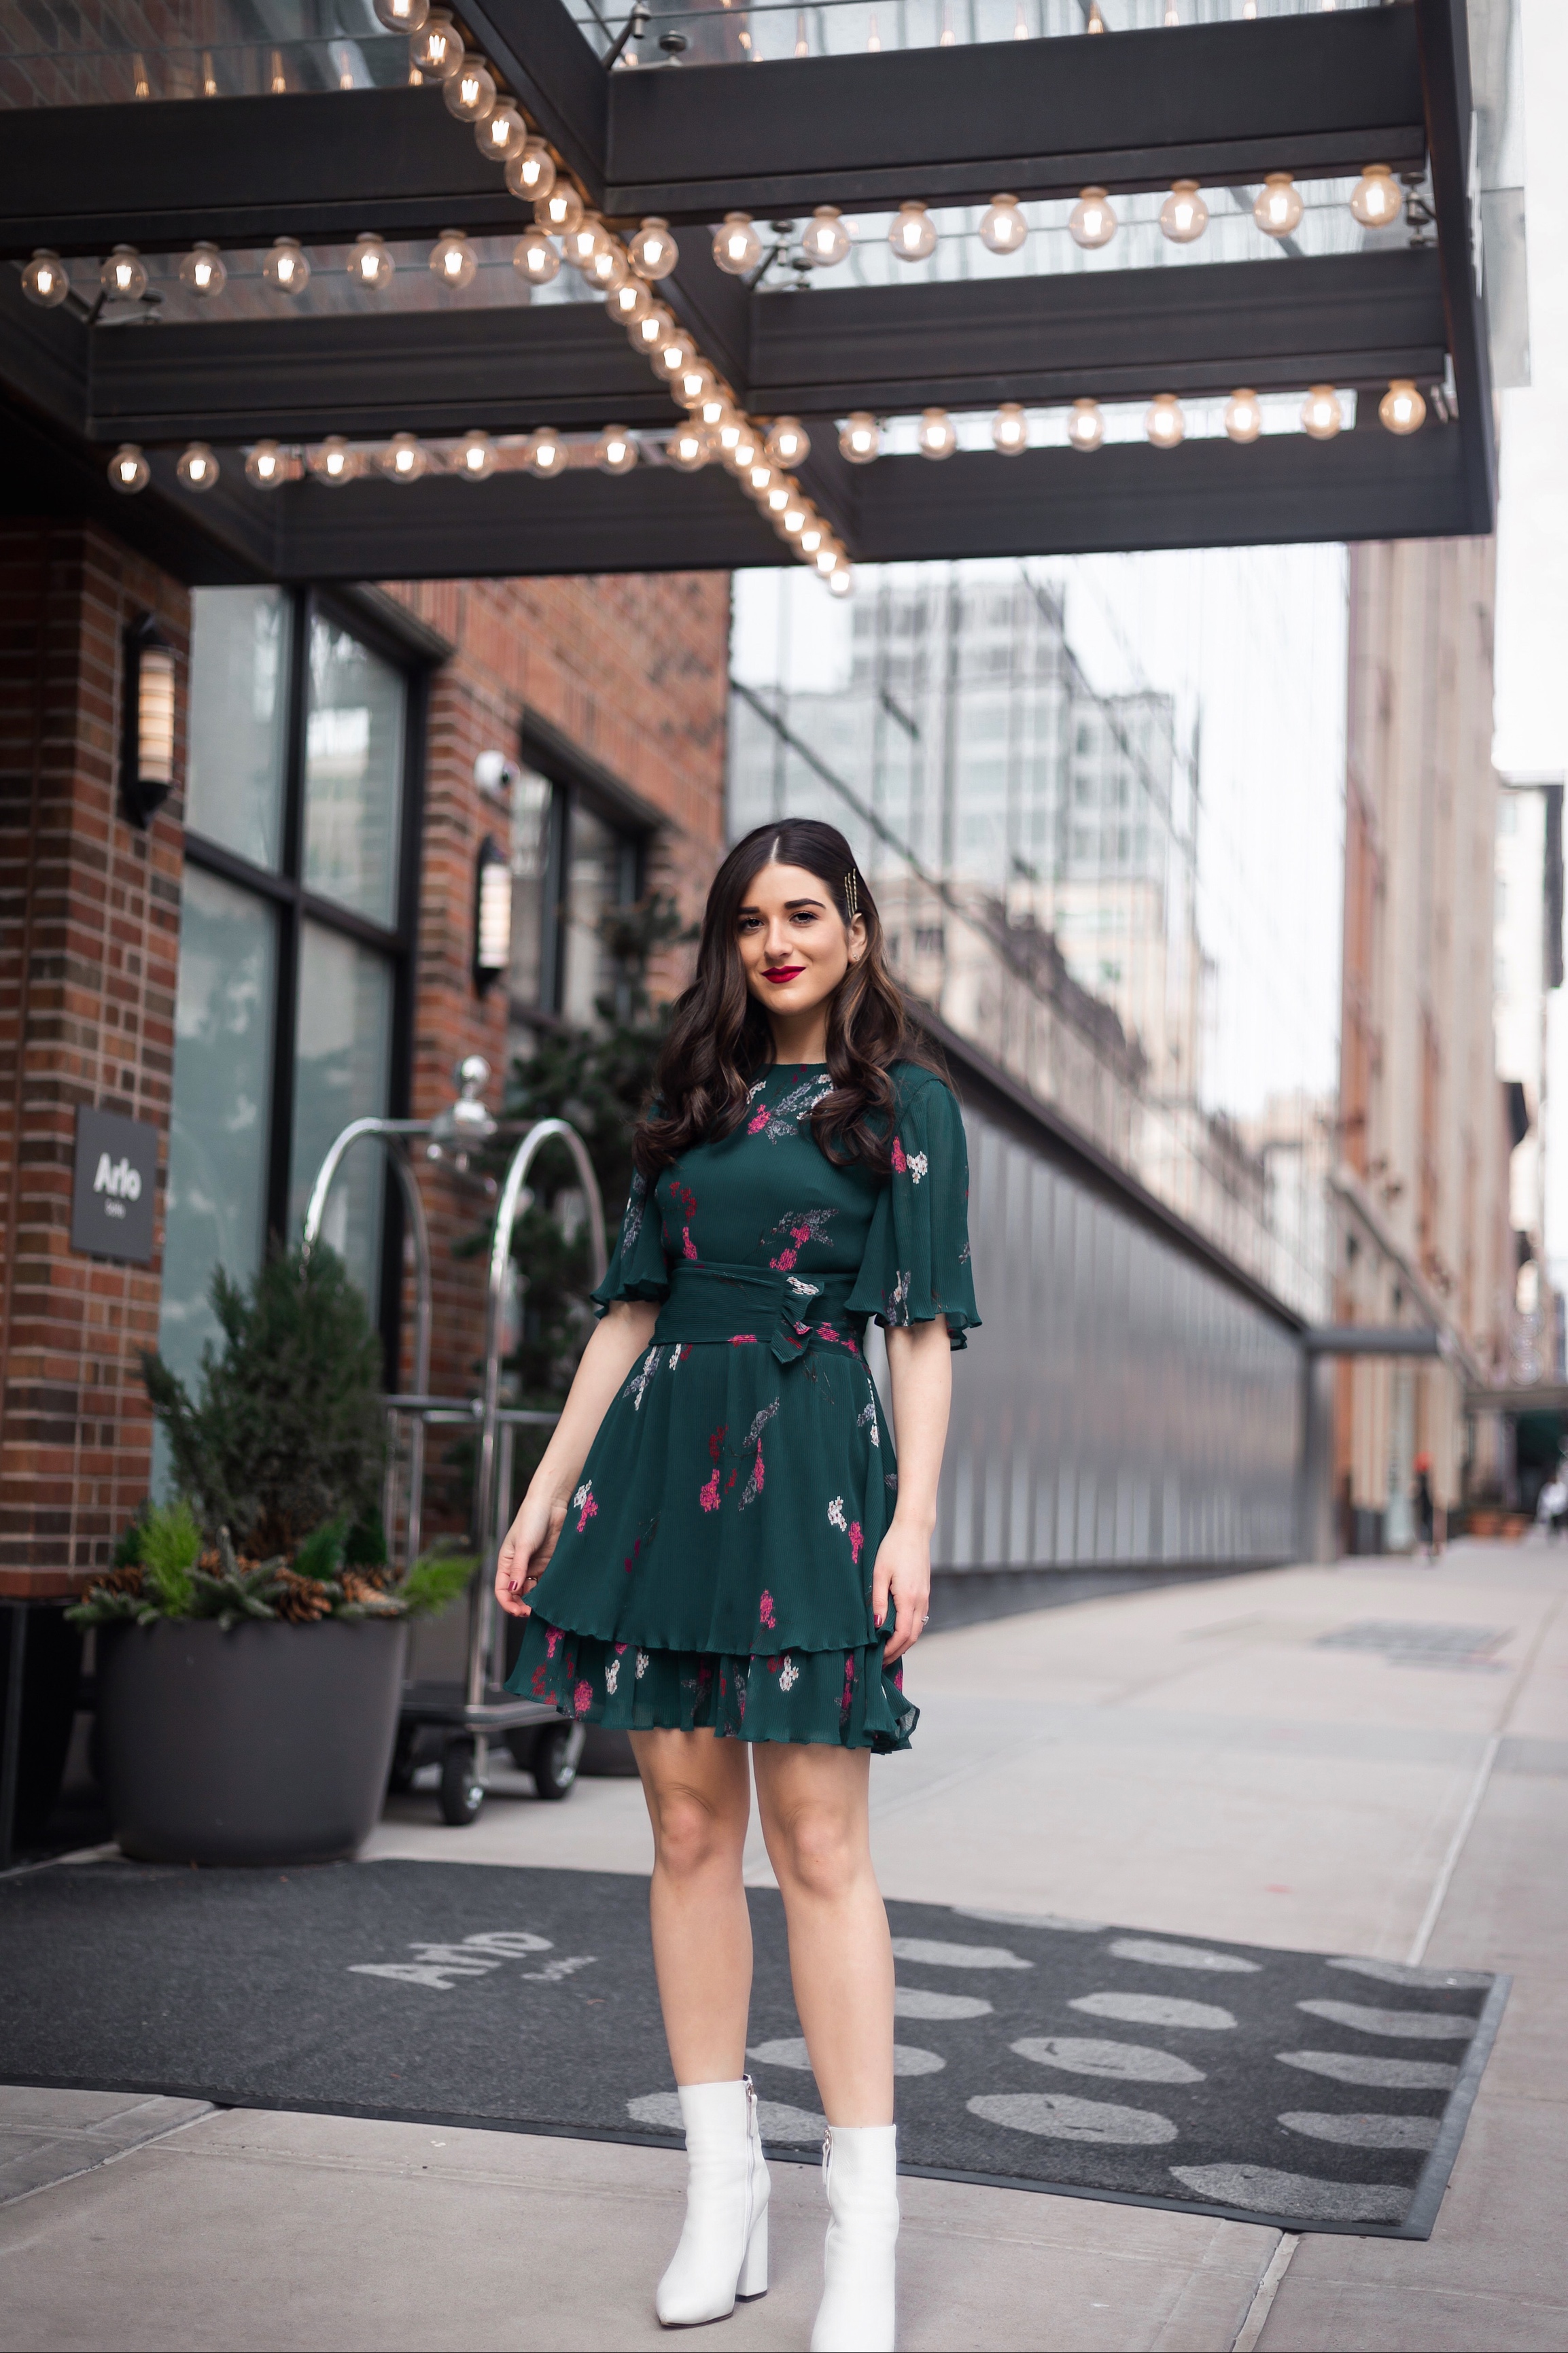 10 NYC Experiences Everyone Should Have Green Floral Dress White Booties Esther Santer Fashion Blog NYC Street Style Blogger Outfit OOTD Trendy Shopping Girl What How To Wear Bobby Pins Hairstyle Fall  Look Butterfly Sleeves Keepsake Label Arlo Soho.JPG